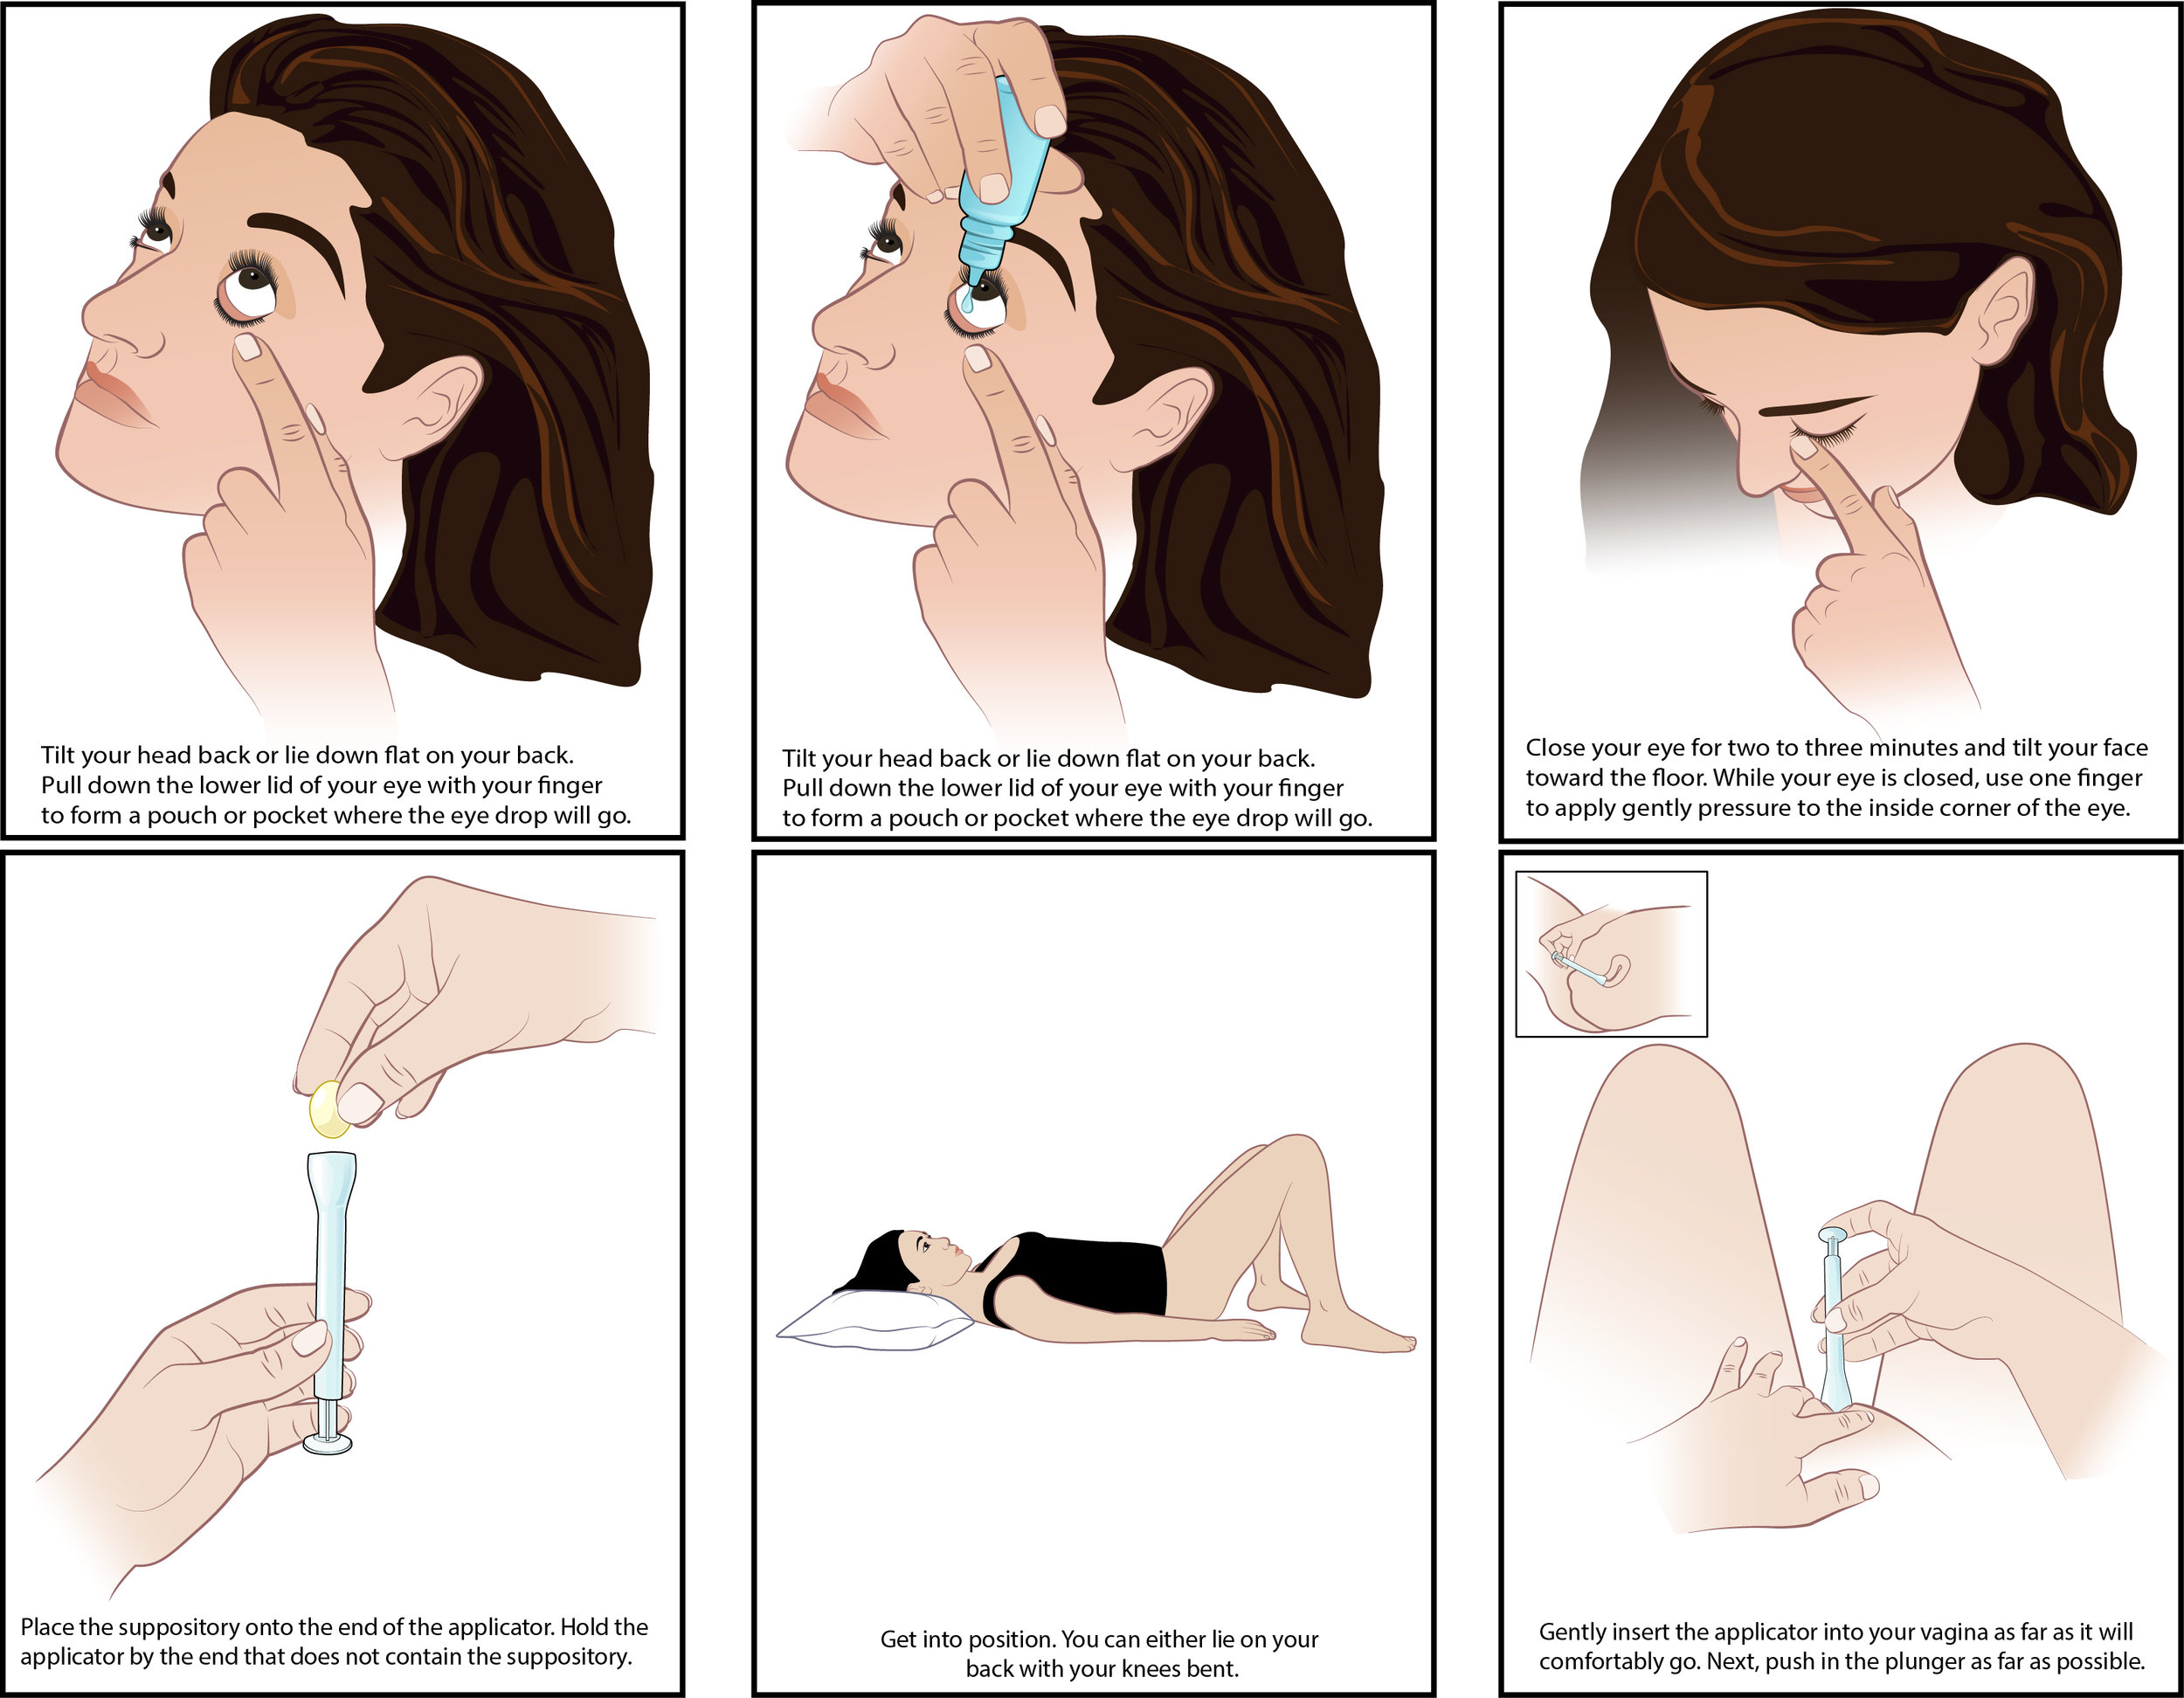   illustration showing the steps of    administering eye drops   &nbsp;    and    vaginal Suppositories      commissioned by Healthline.com     Adobe Illustrator    